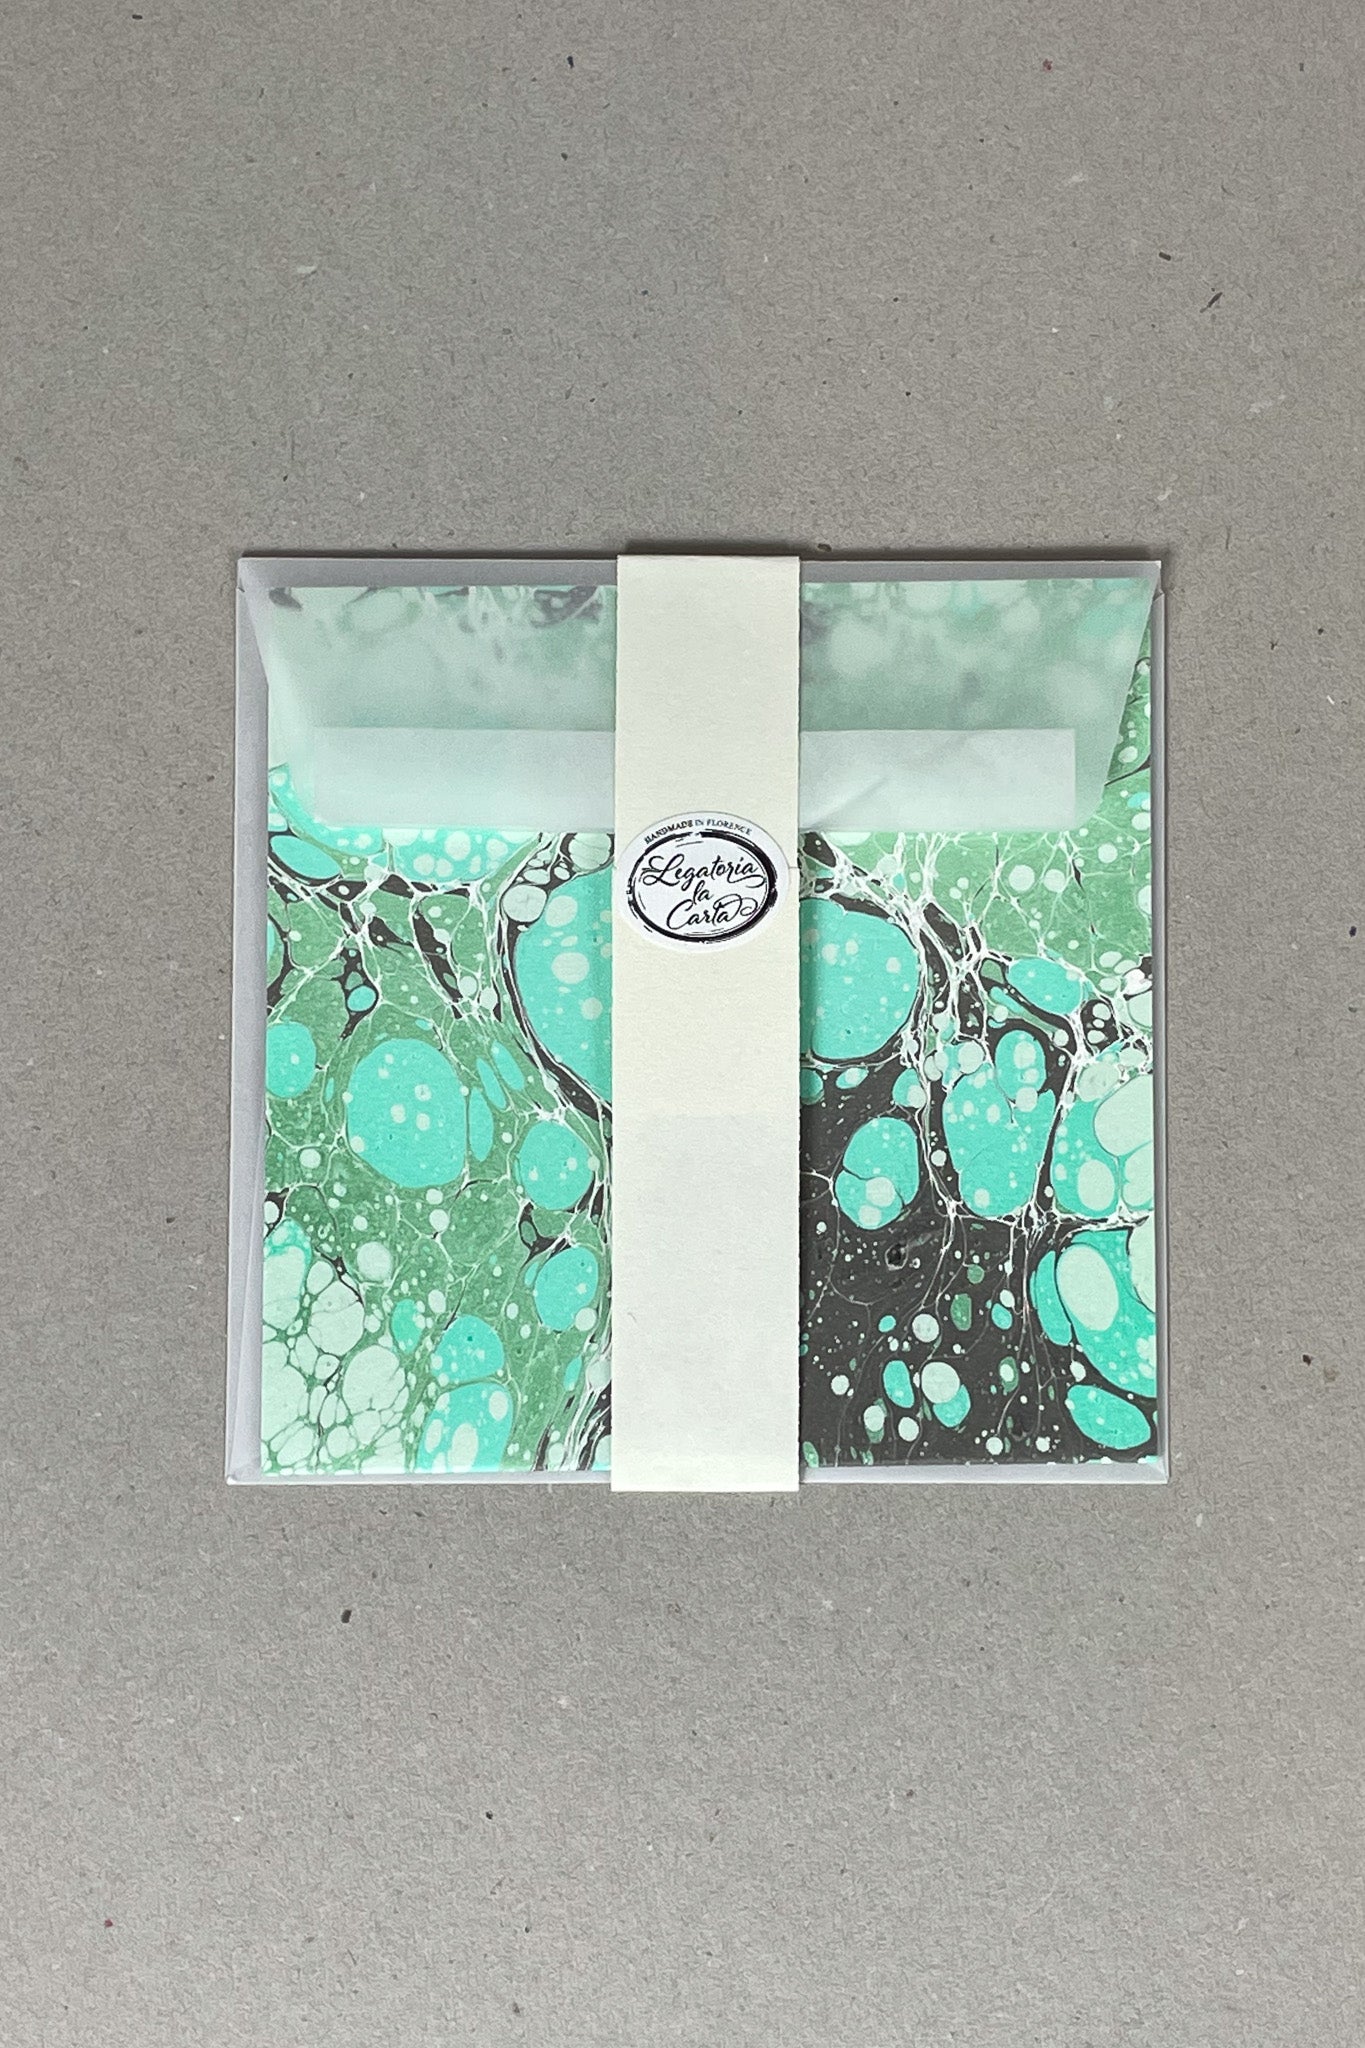 Green Hand Marbled Card - Made in Italy